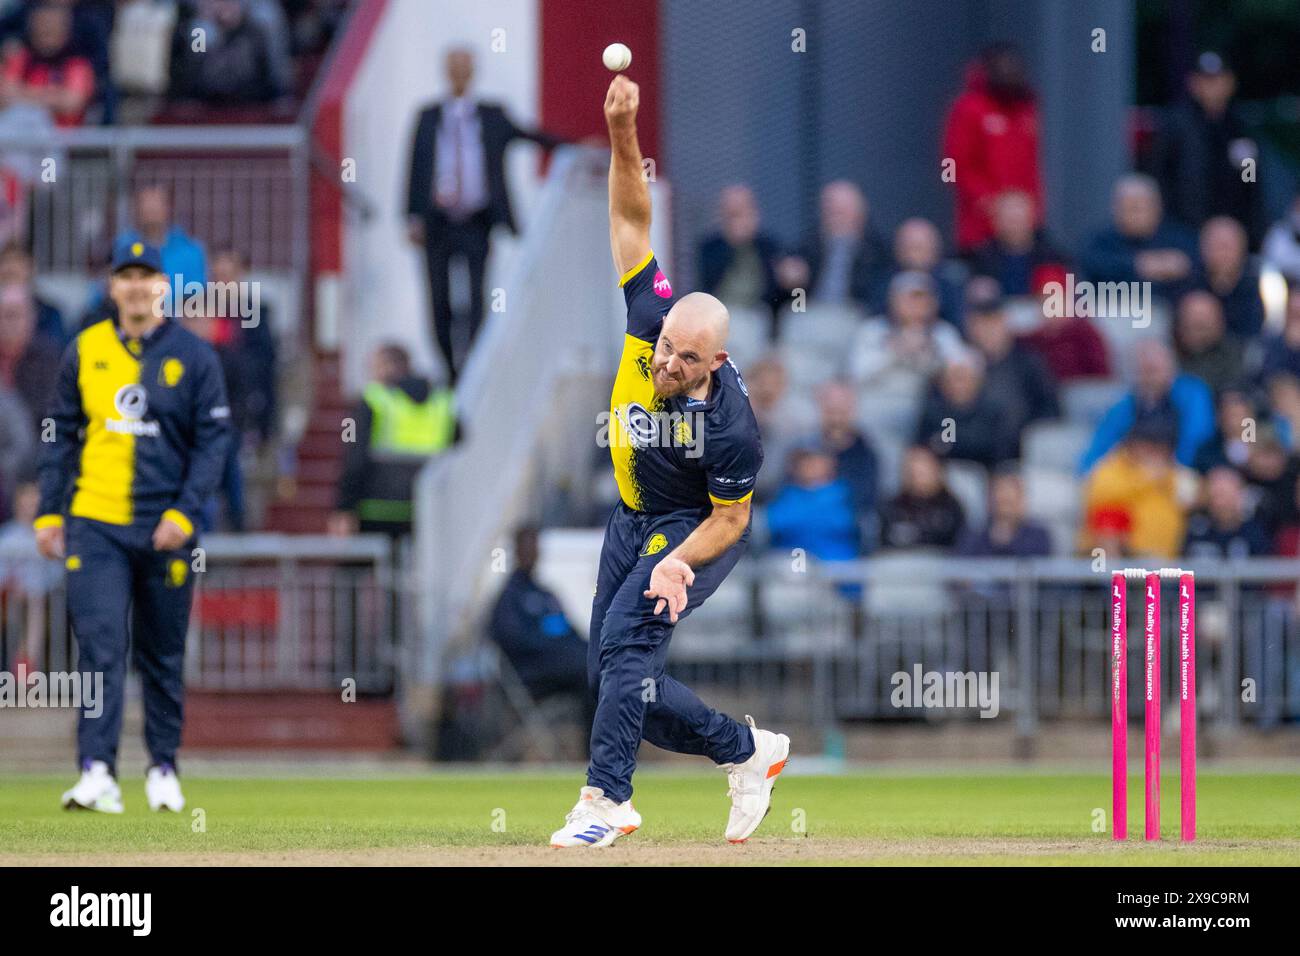 Ben Raine #44 of Durham Cricket bowling during the Vitality Blast T20 match between Lancashire and Durham at Old Trafford, Manchester on Thursday 30th May 2024. (Photo: Mike Morese | MI News) Credit: MI News & Sport /Alamy Live News Stock Photo